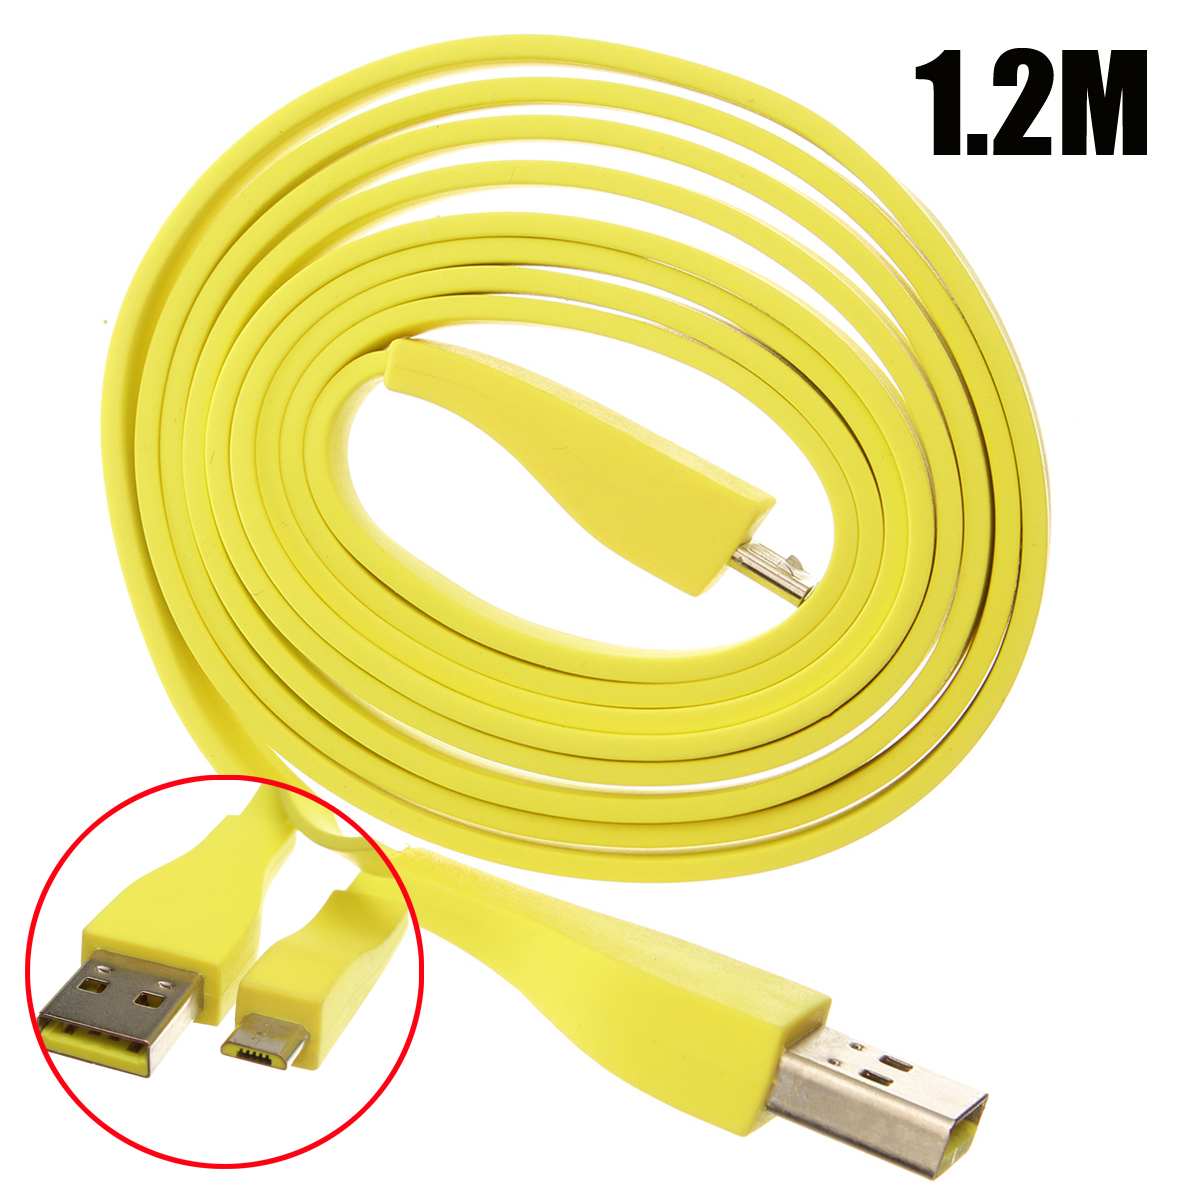 **SPECIAL** 1.2M Micro USB PC Charger Cable suits for Logitech UE MEGABOOM Bluetooth Speaker Data Transfer USB Extension Cord